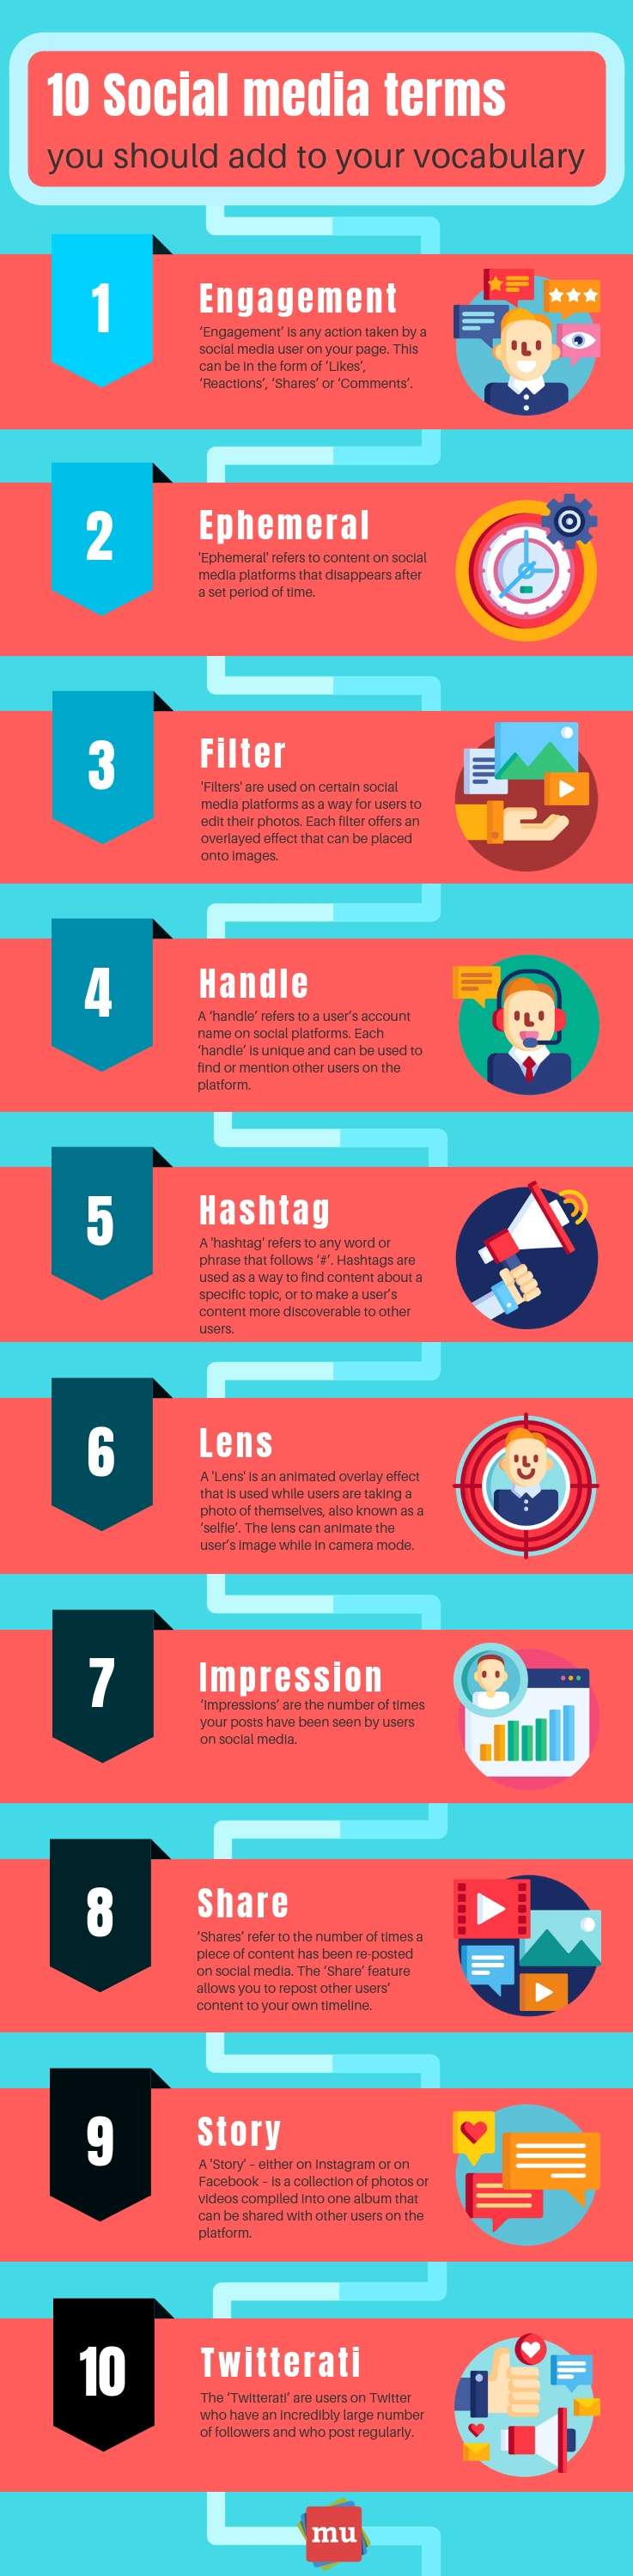 Infographic 10 Social media terms you should add to your vocabulary